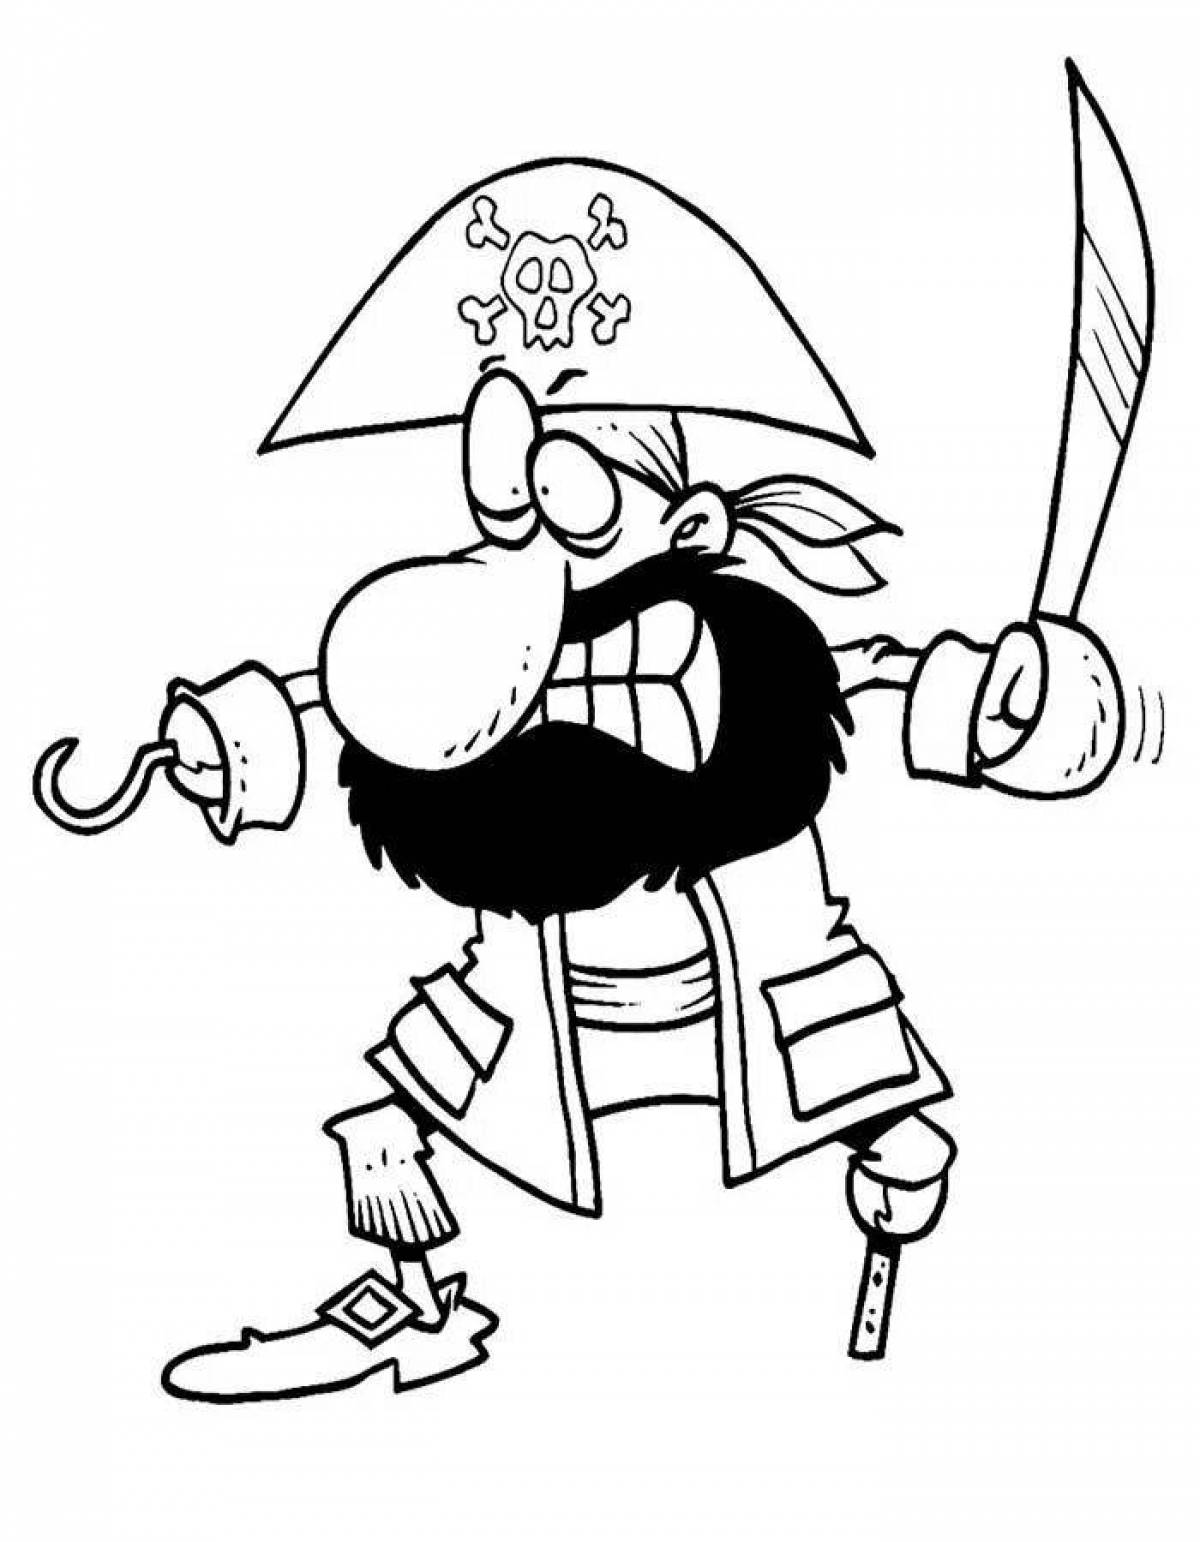 Courageous pirate coloring page